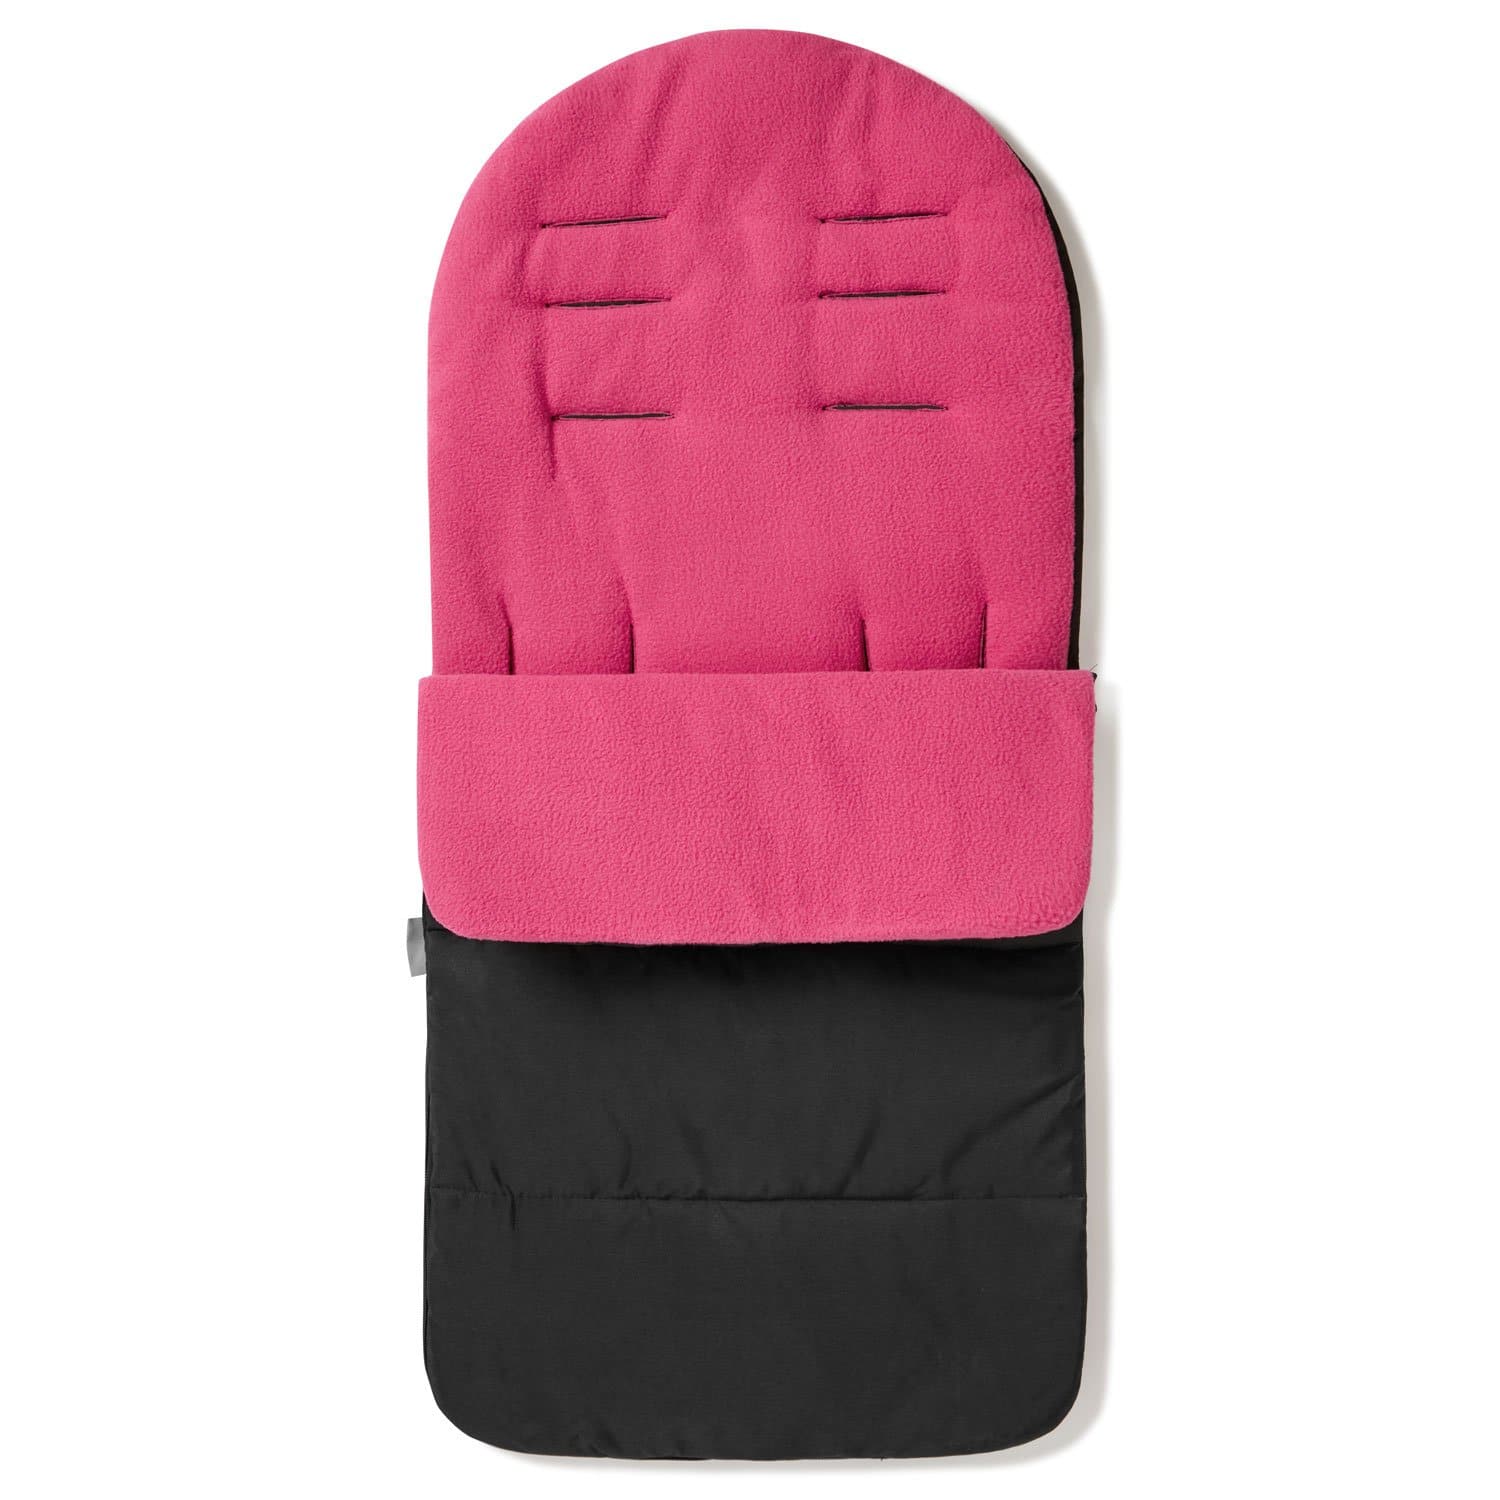 Premium Footmuff / Cosy Toes Compatible with Seed - Pink Rose / Fits All Models | For Your Little One